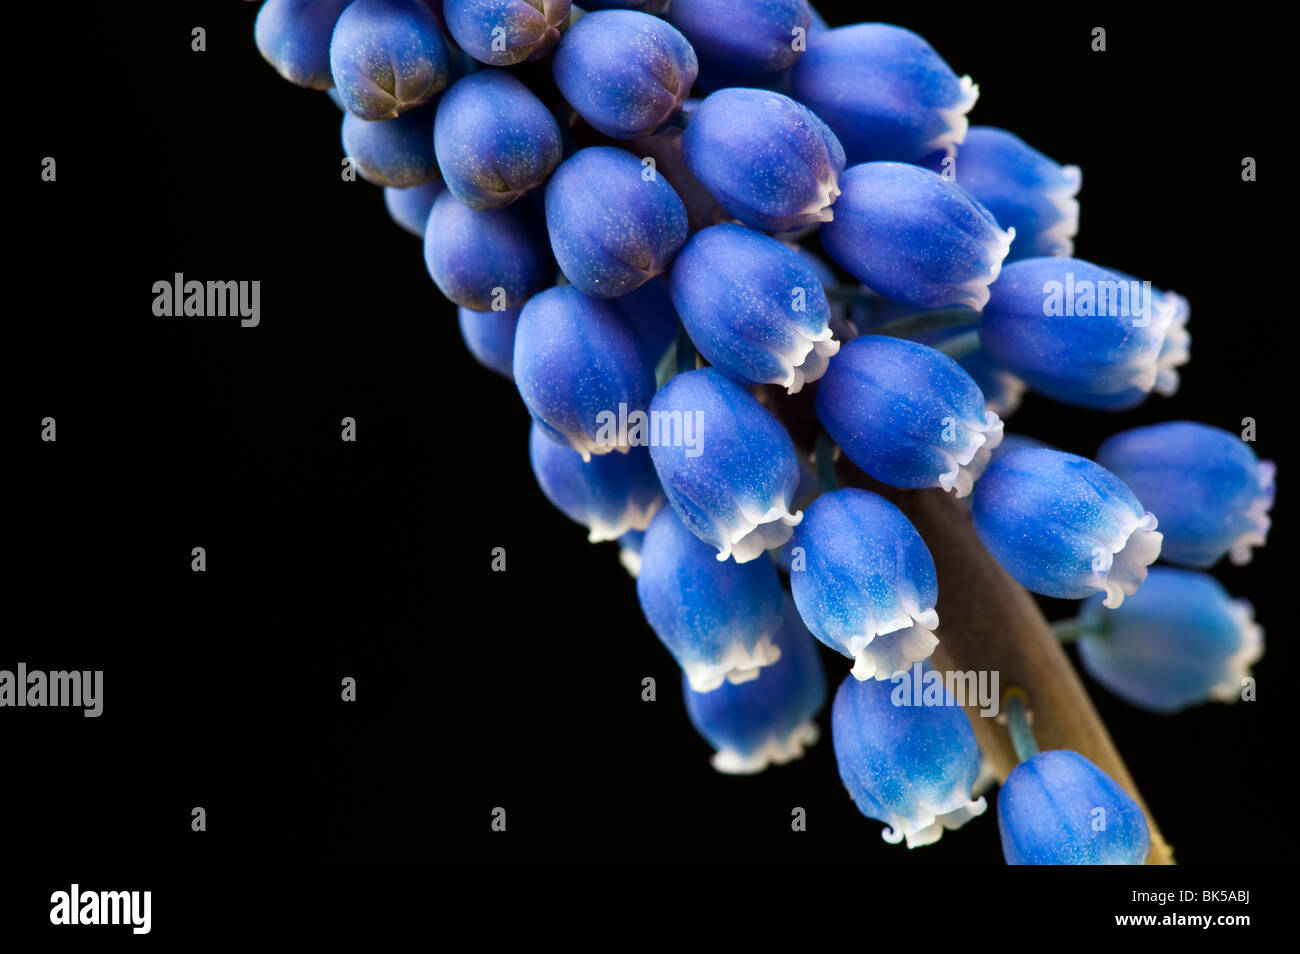 Grape Hyacinths against a black background Stock Photo